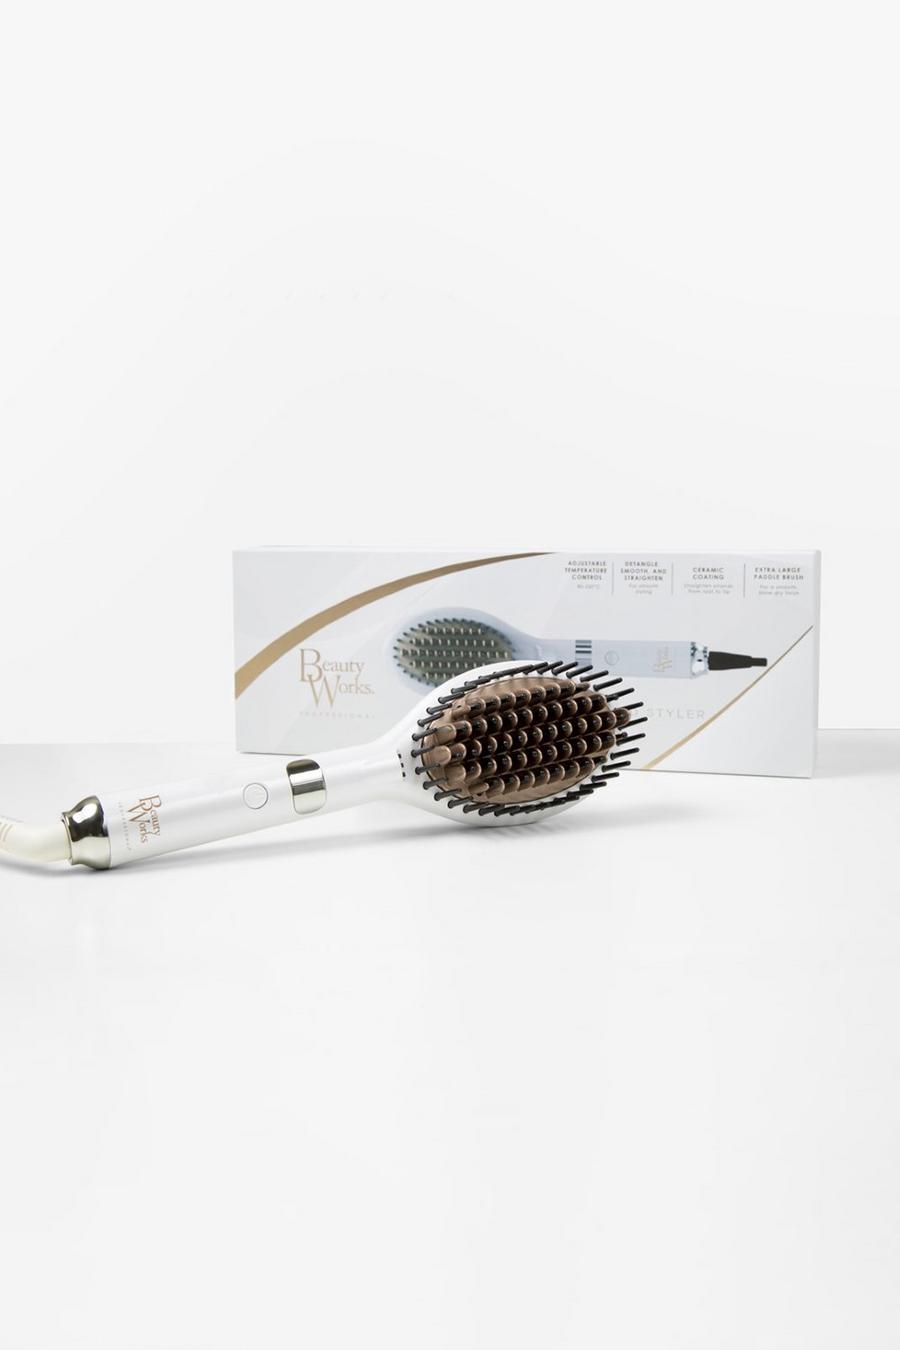 Beauty Works - Brosse à cheveux chauffante, White image number 1